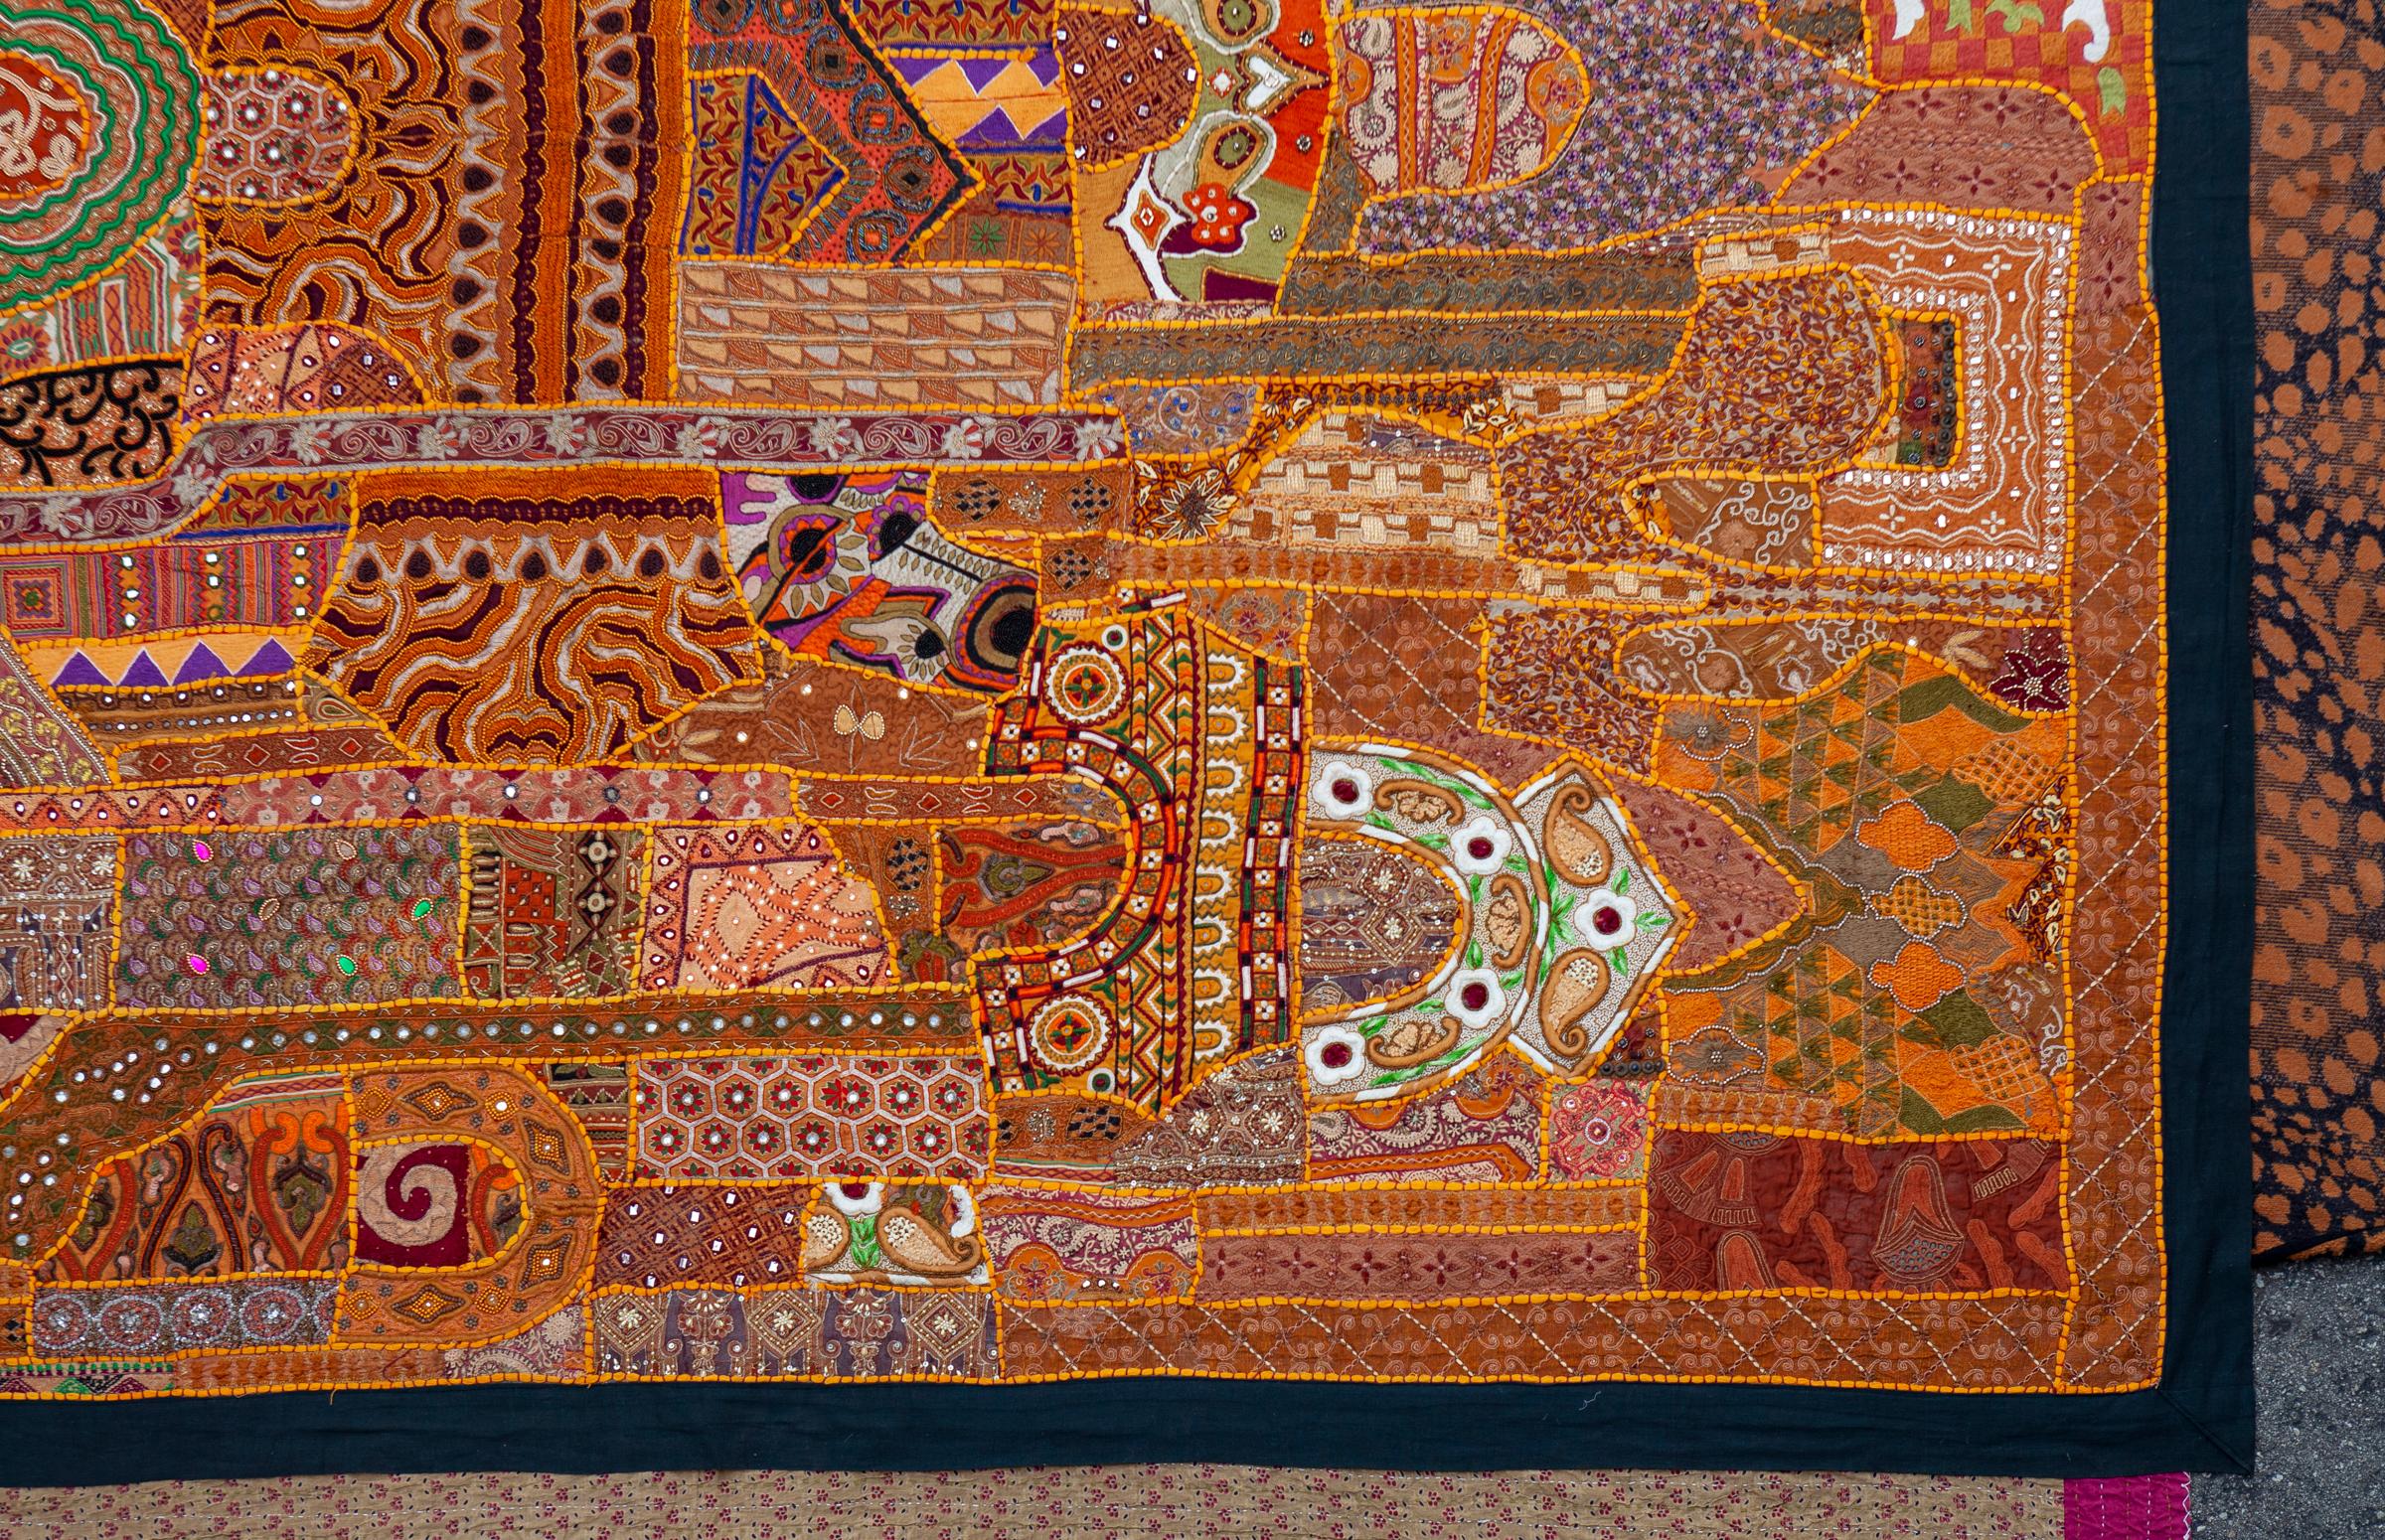 Orange East Indian sequined wall hanging/tapestry. Hand made with antique fabric from India. Some of the fabrics are from antique saris & include glass beading, metal threads & sequins. Finished with black border.
8’7” long x 7’ wide.